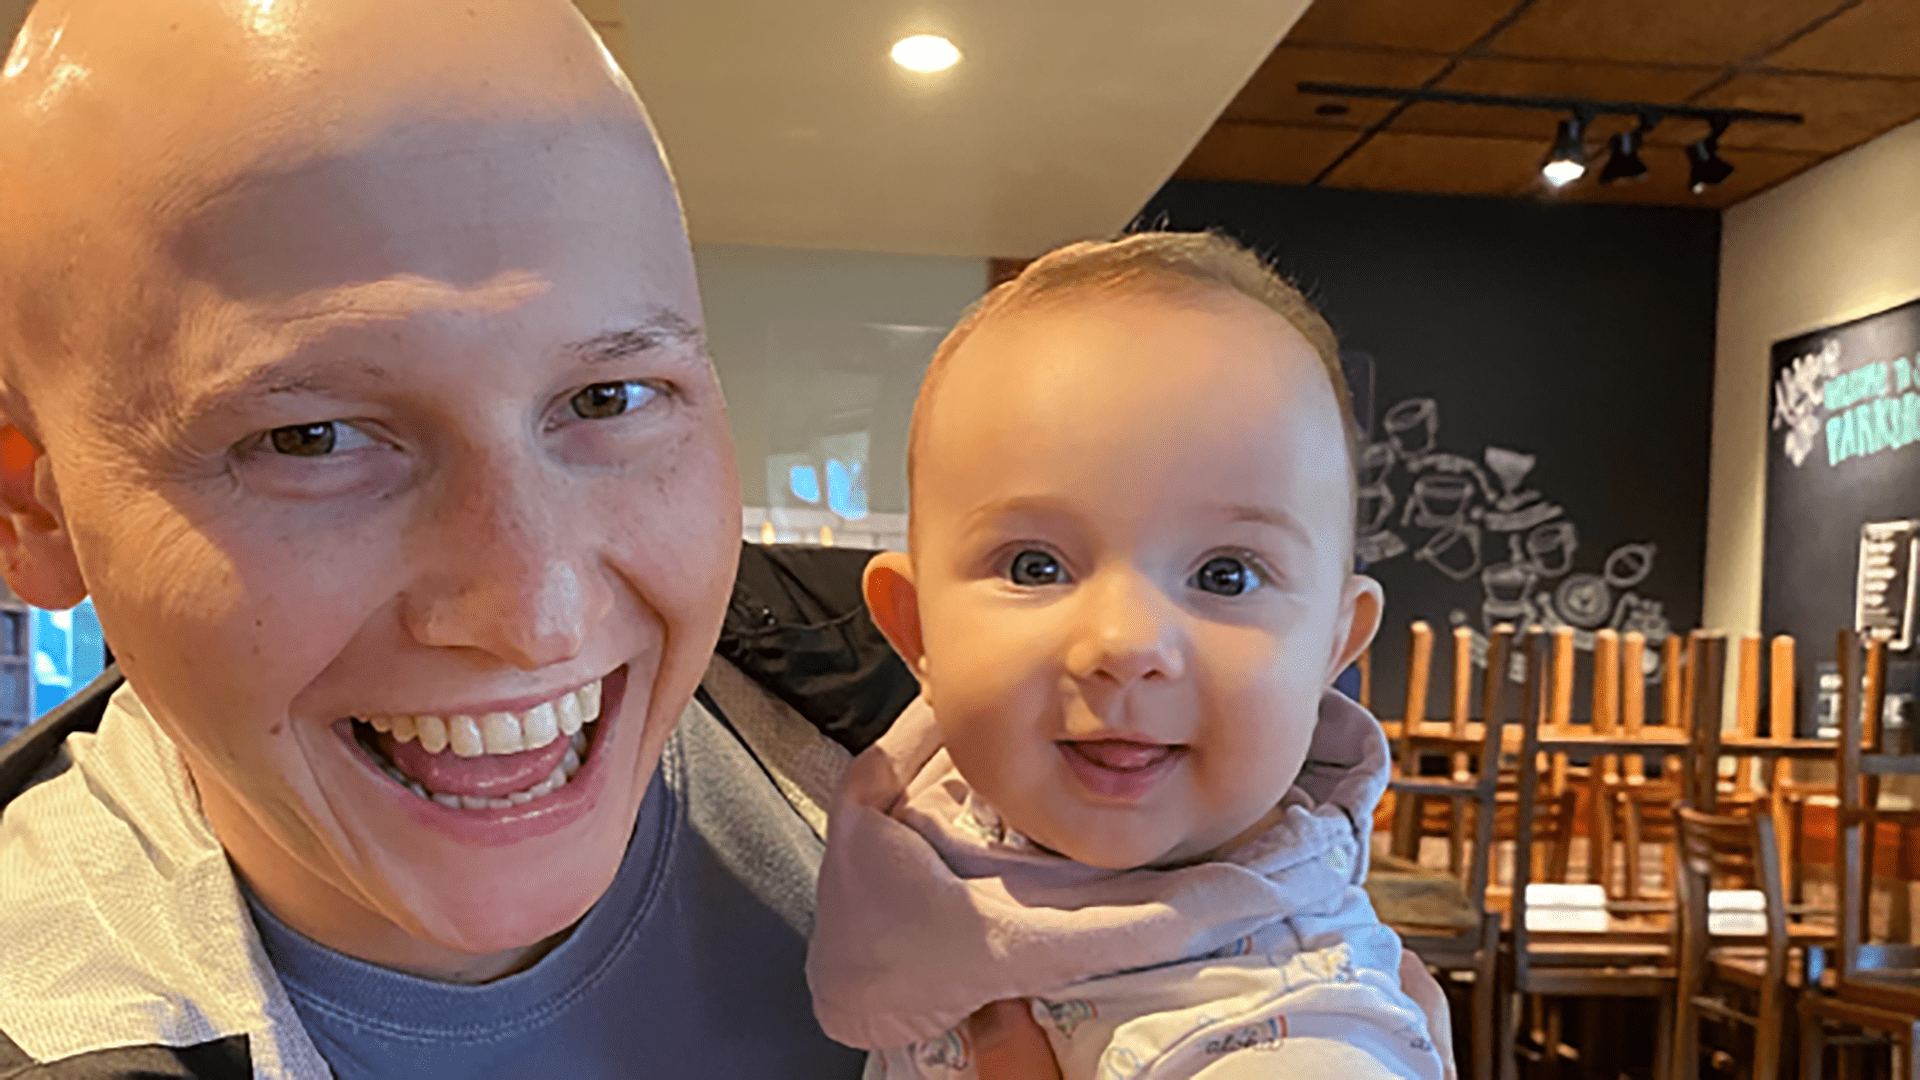 A bald young man holding a baby